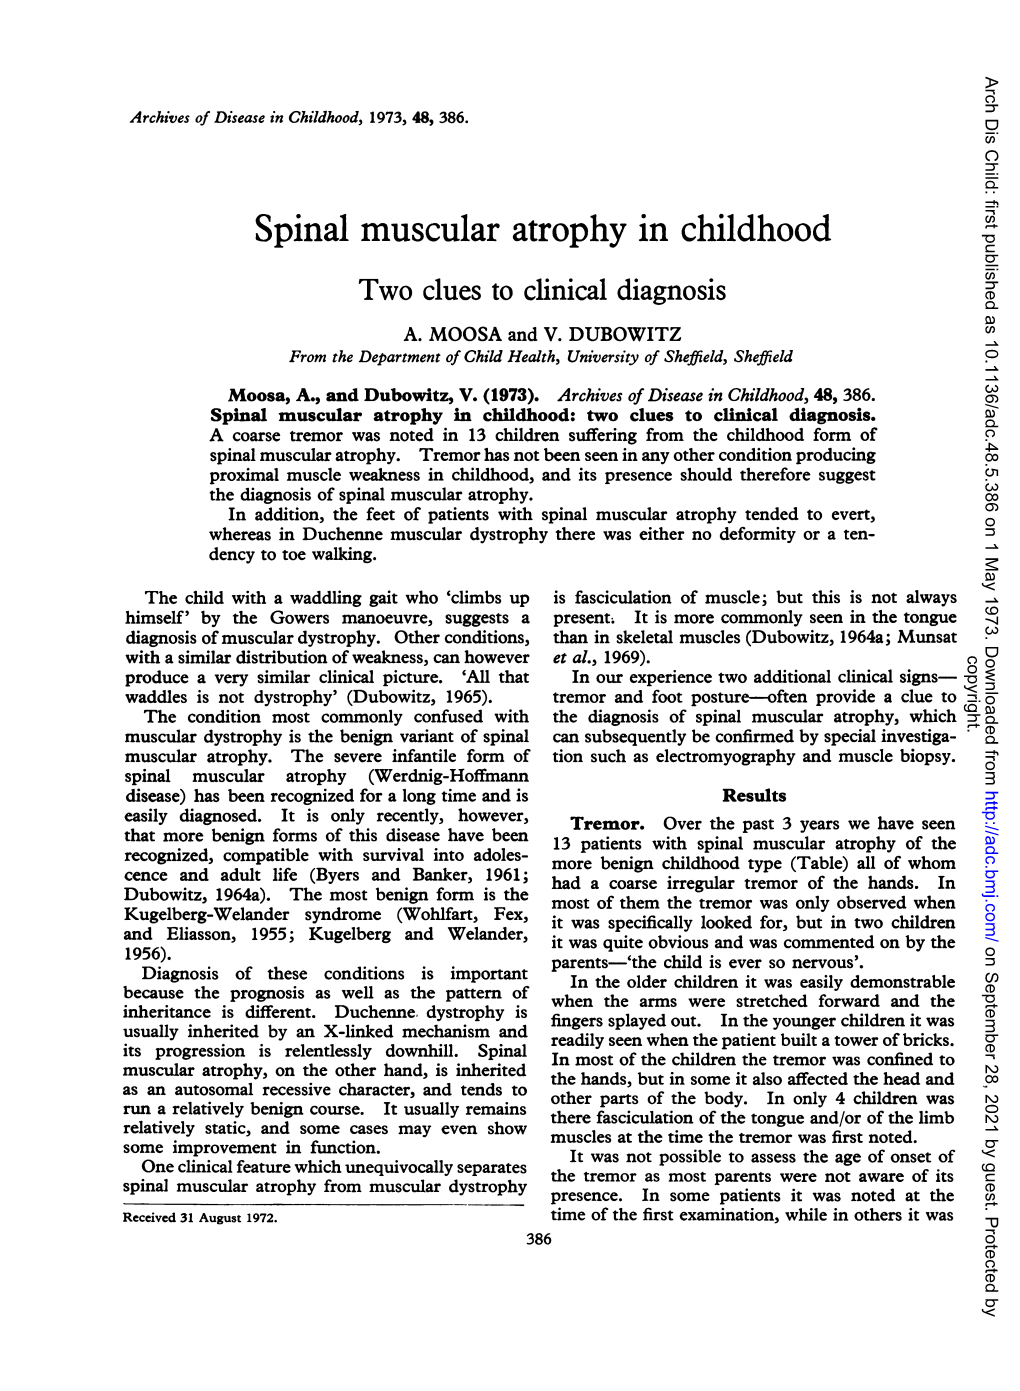 Spinal Muscular Atrophy in Childhood Two Clues to Clinical Diagnosis A